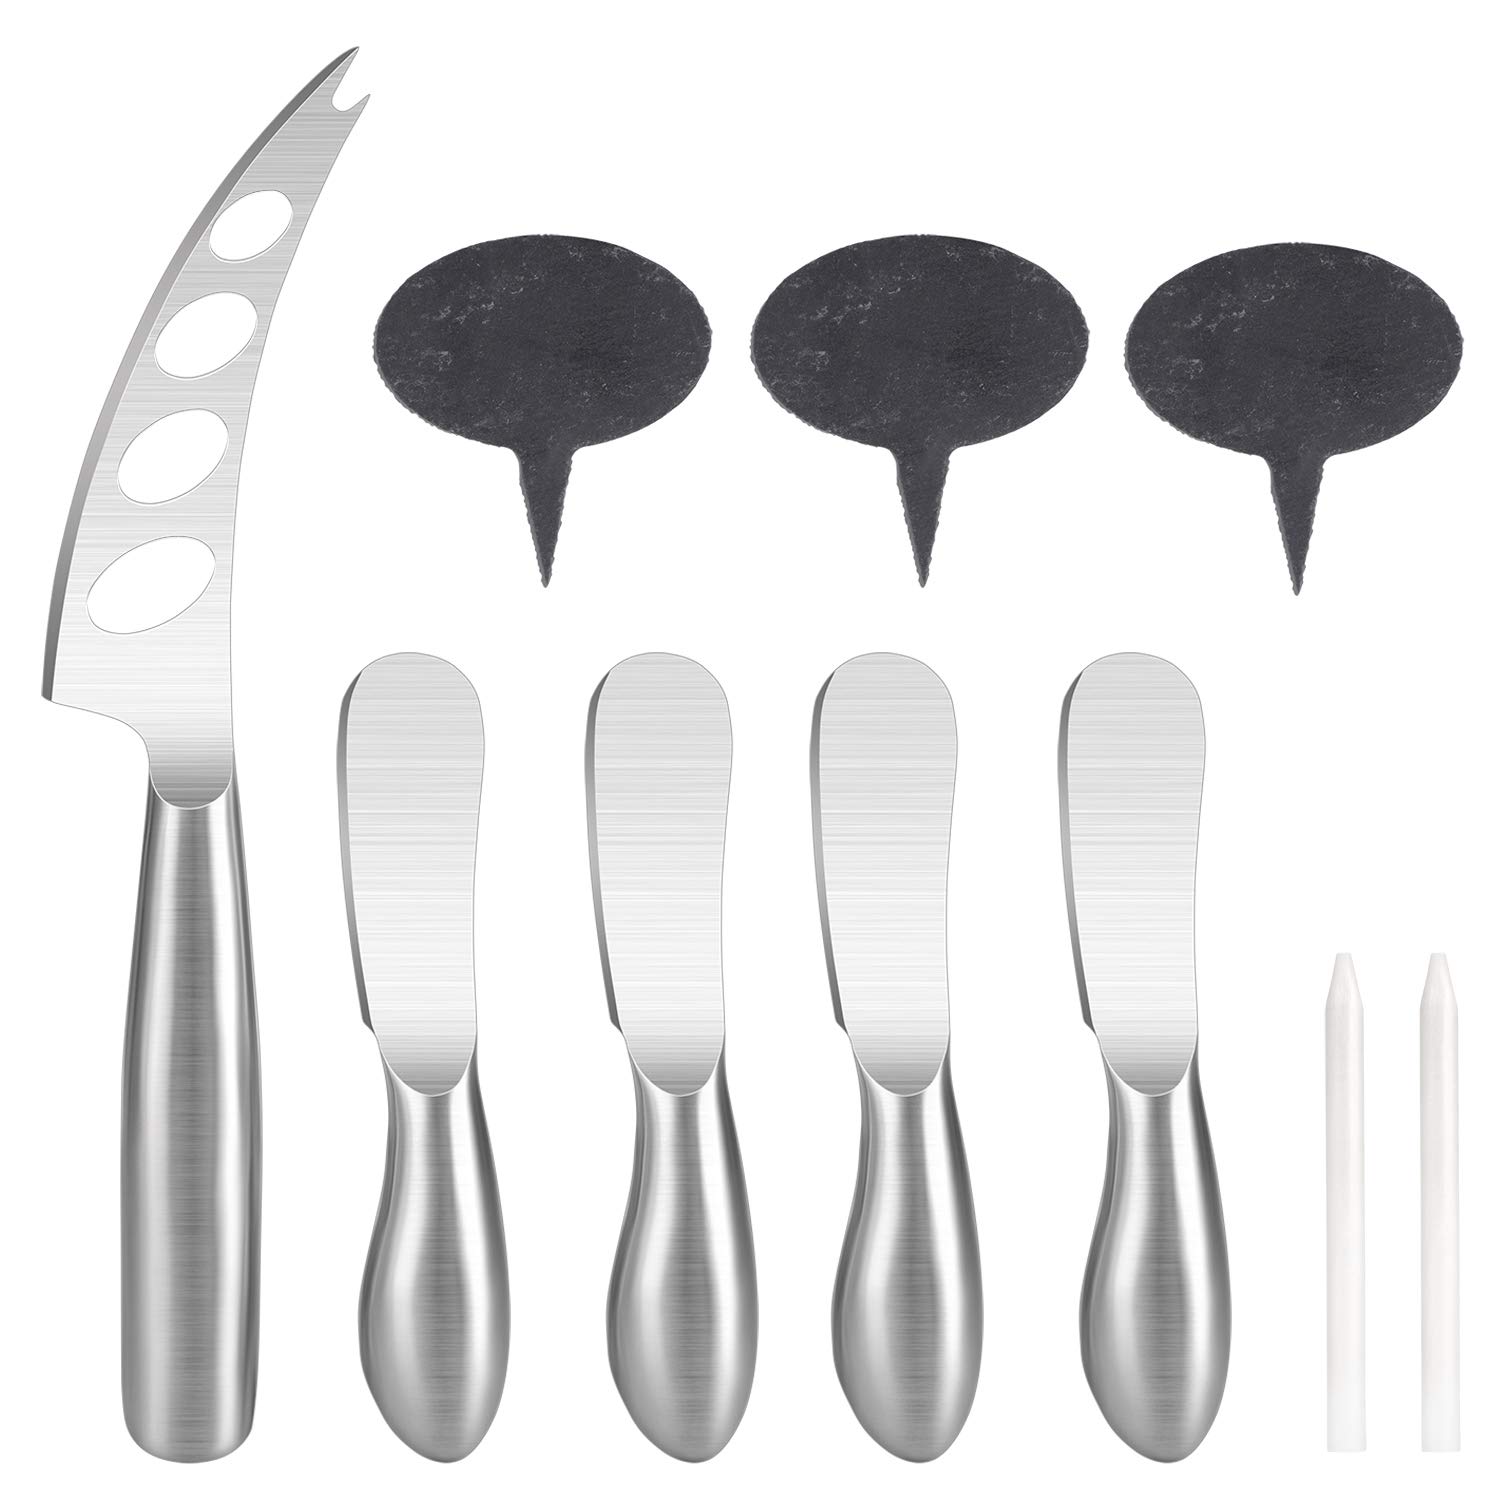 MH ZONE Cheese Spreader Knife Set 5-Piece, 5 Stainless Steel Cheese Knife Butter Spreader Knives With 3 Chalk Labels & 2 -Chalk Markers, Perfect Christmas Gifts